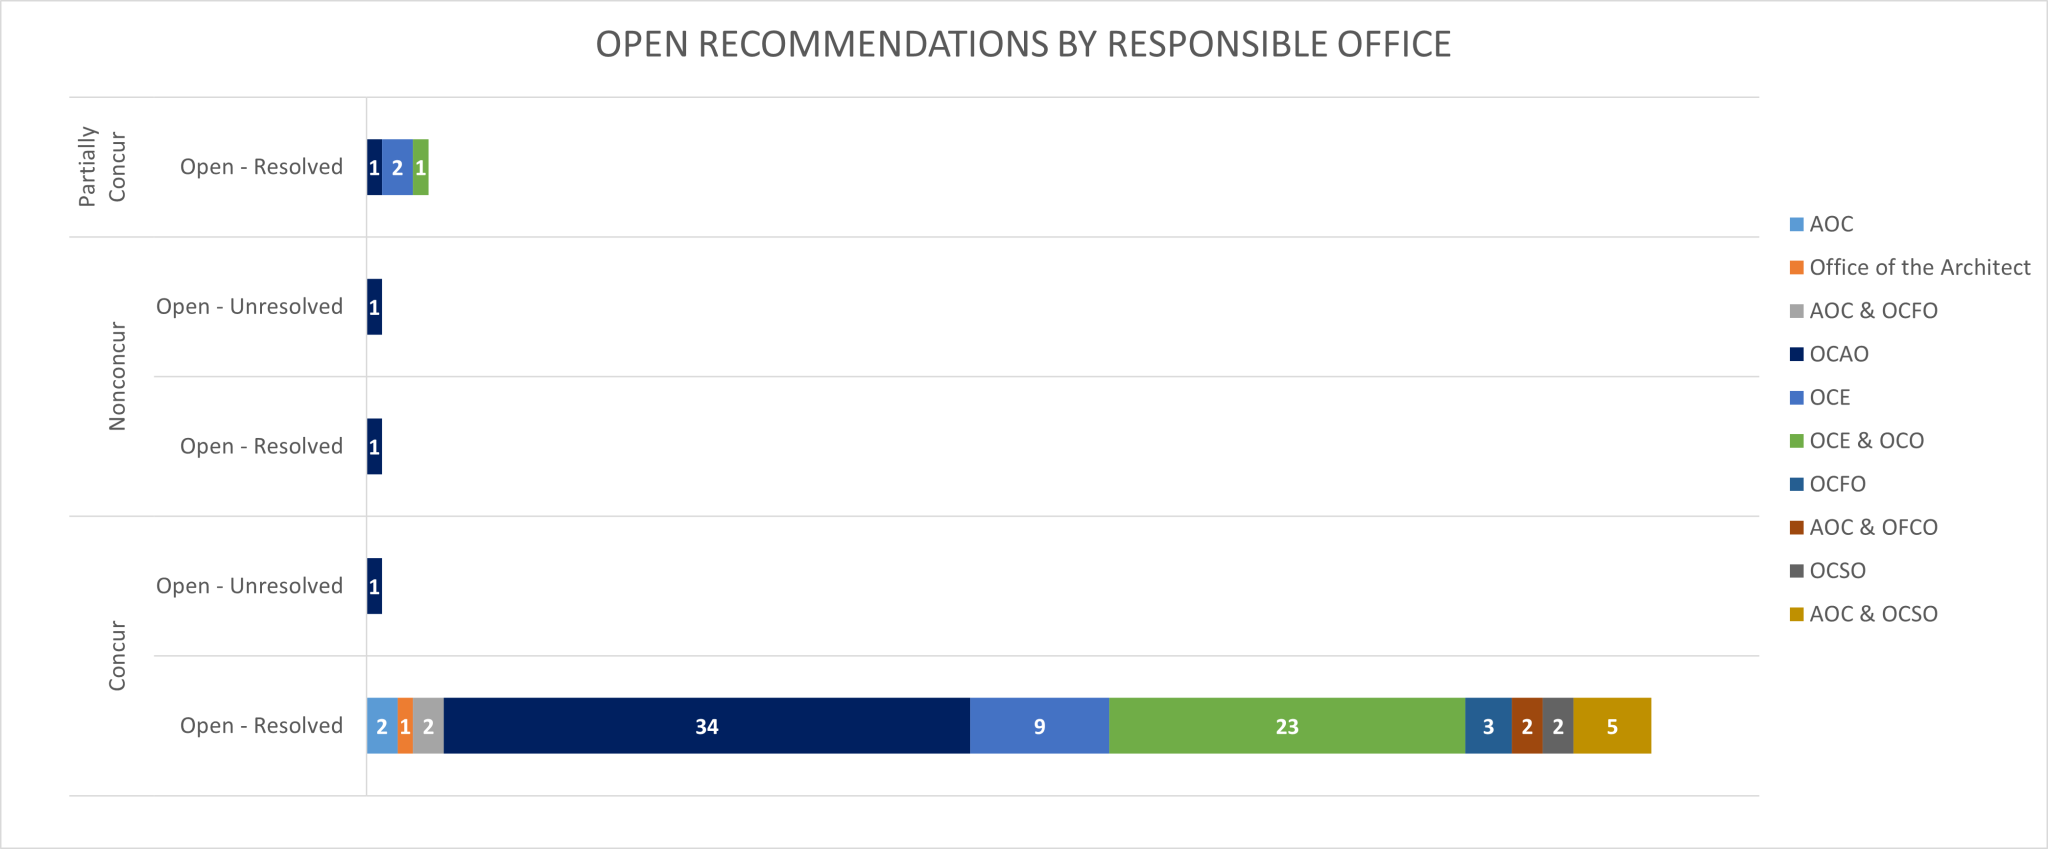 Open Recommendations By Responsible Office